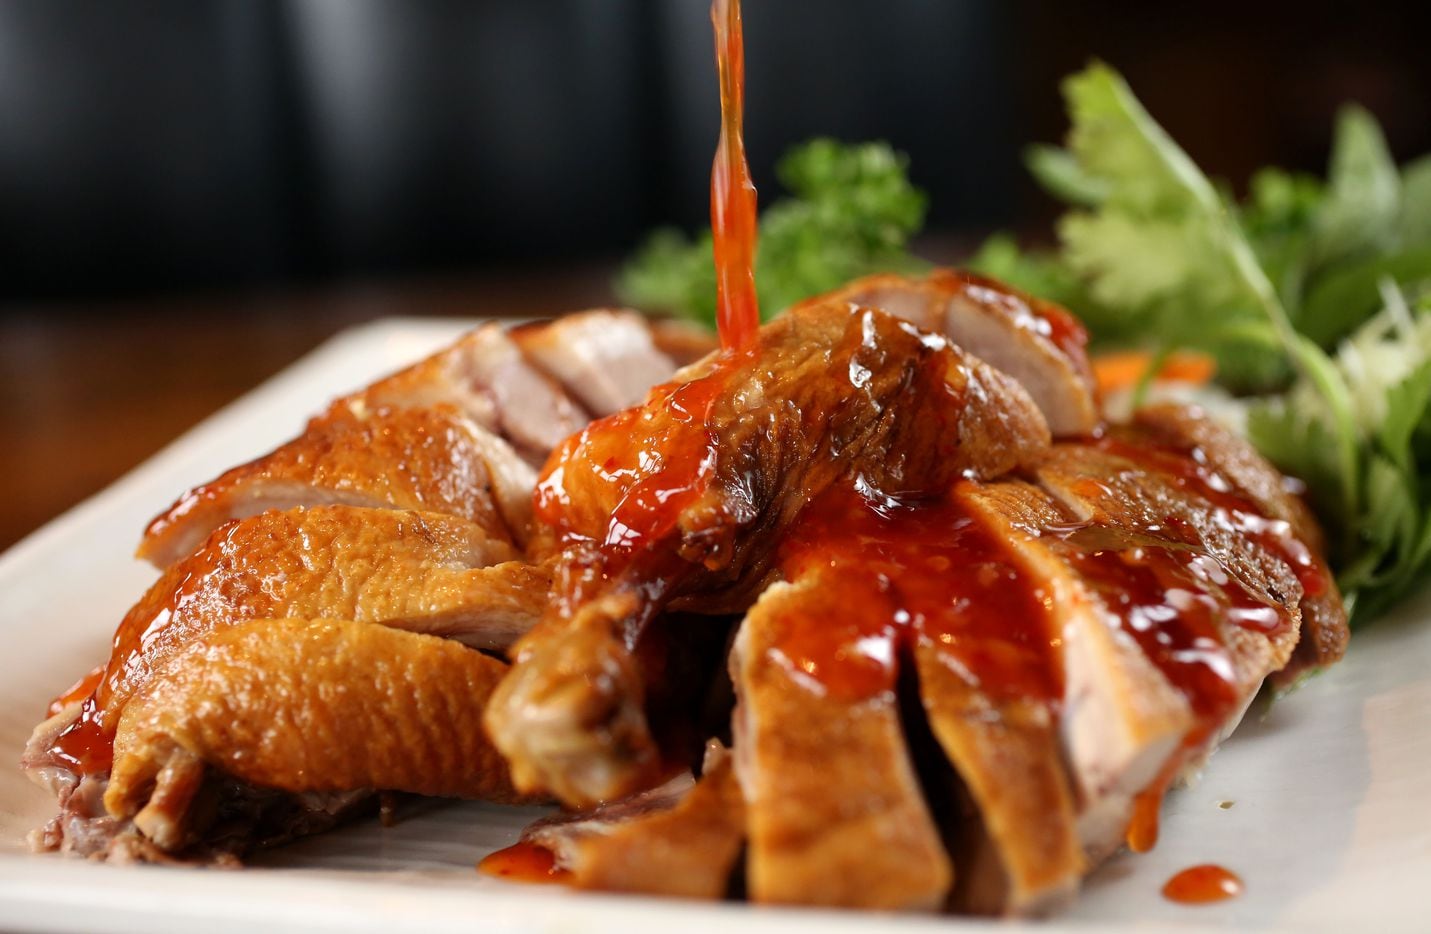 Taiwanese smoked duck at Yama Izakaya and Sushi Legacy, a Japanese restaurant that features an entire Taiwanese menu prepared by a Taiwanese chef, Hsiu Fu "Allen" Hsu.  (Rose Baca/Staff Photographer)